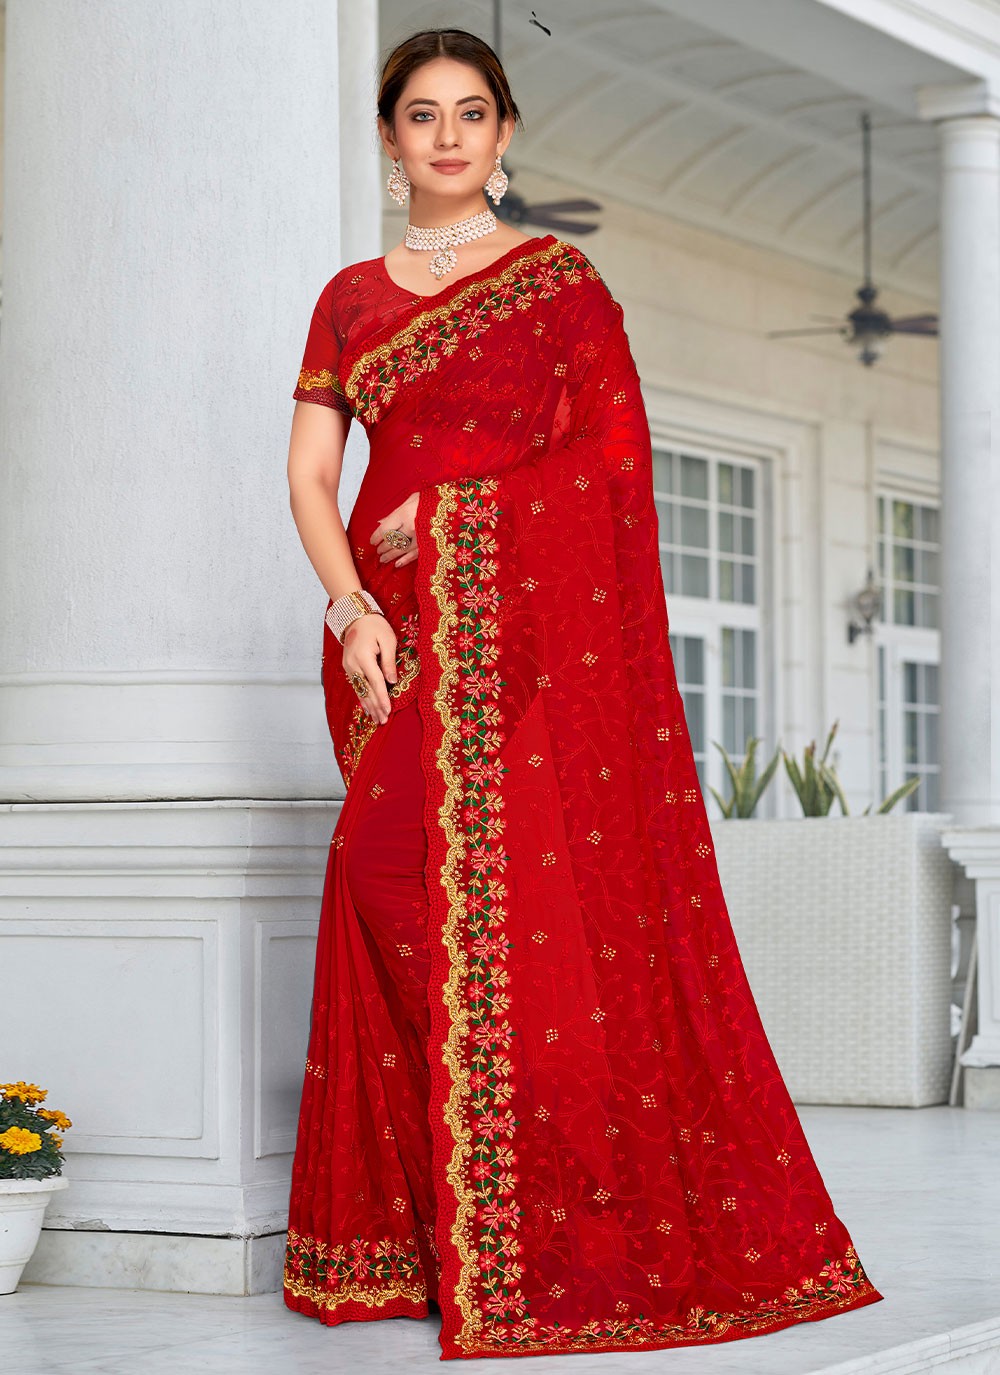 Kanishka Vol 7 Buy Saree Online At Low Prices Collection